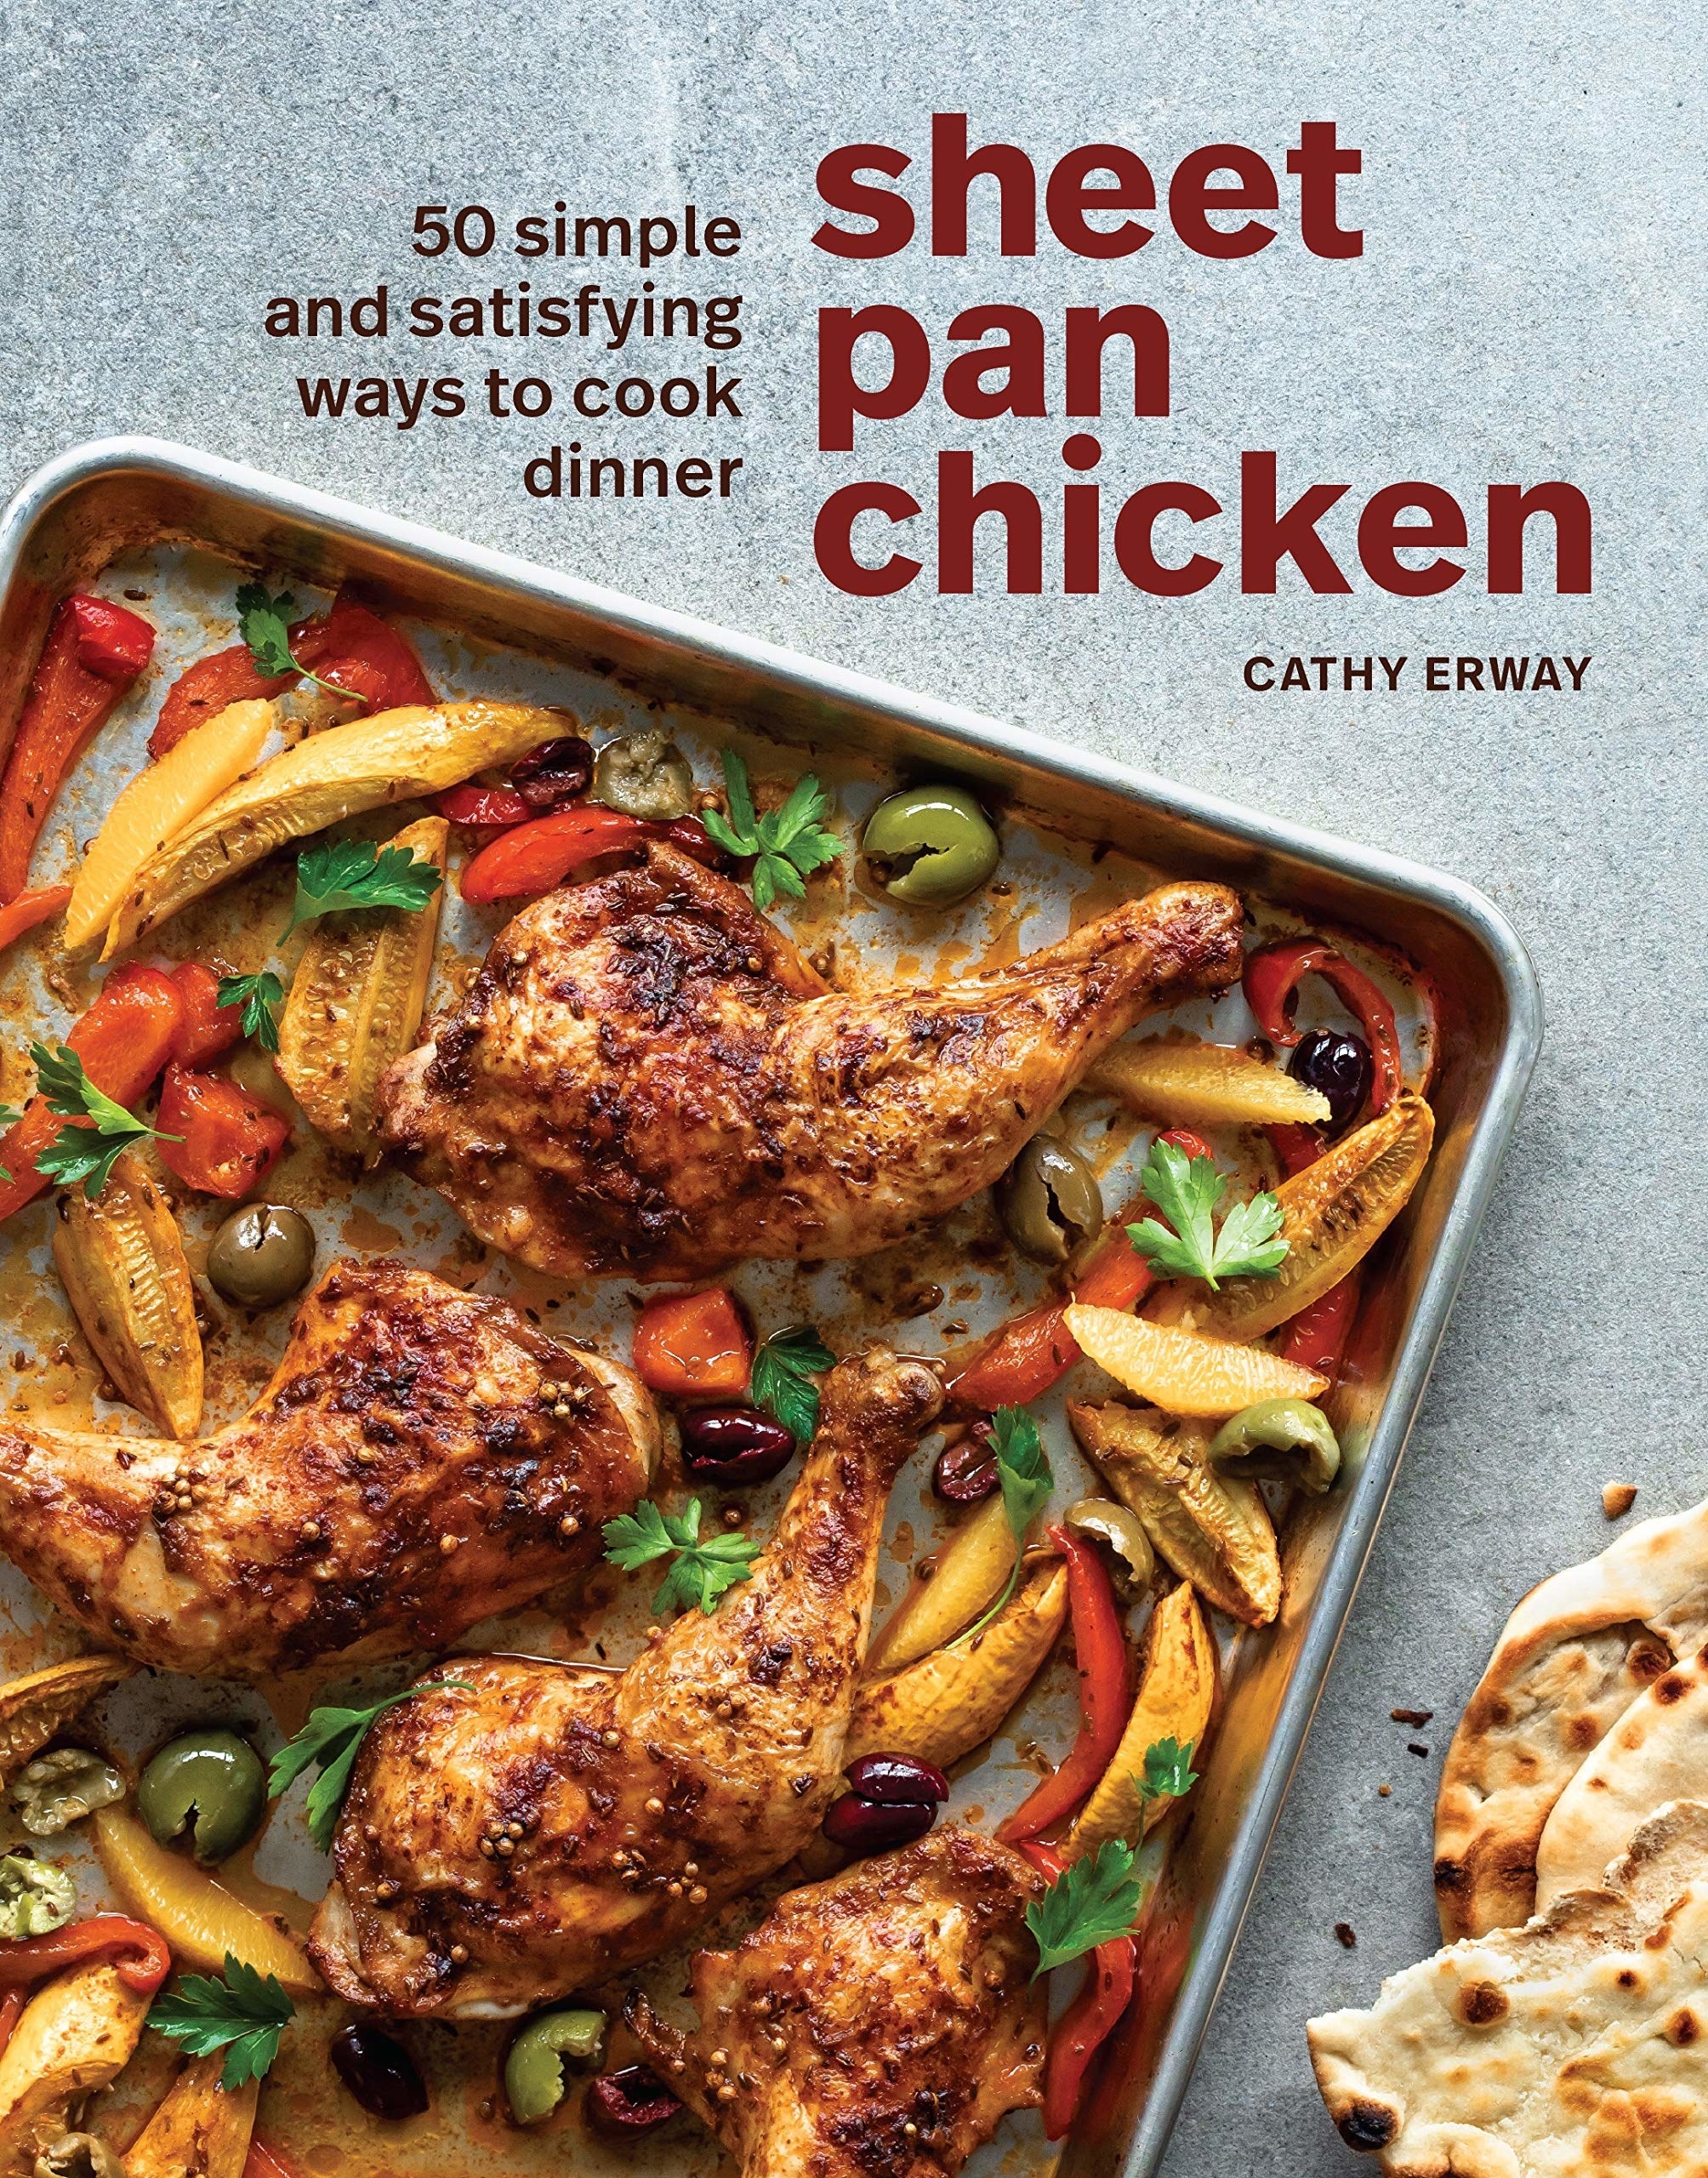 The cover of &#x27;Sheet Pan Chicken&#x27; by Cathy Erway